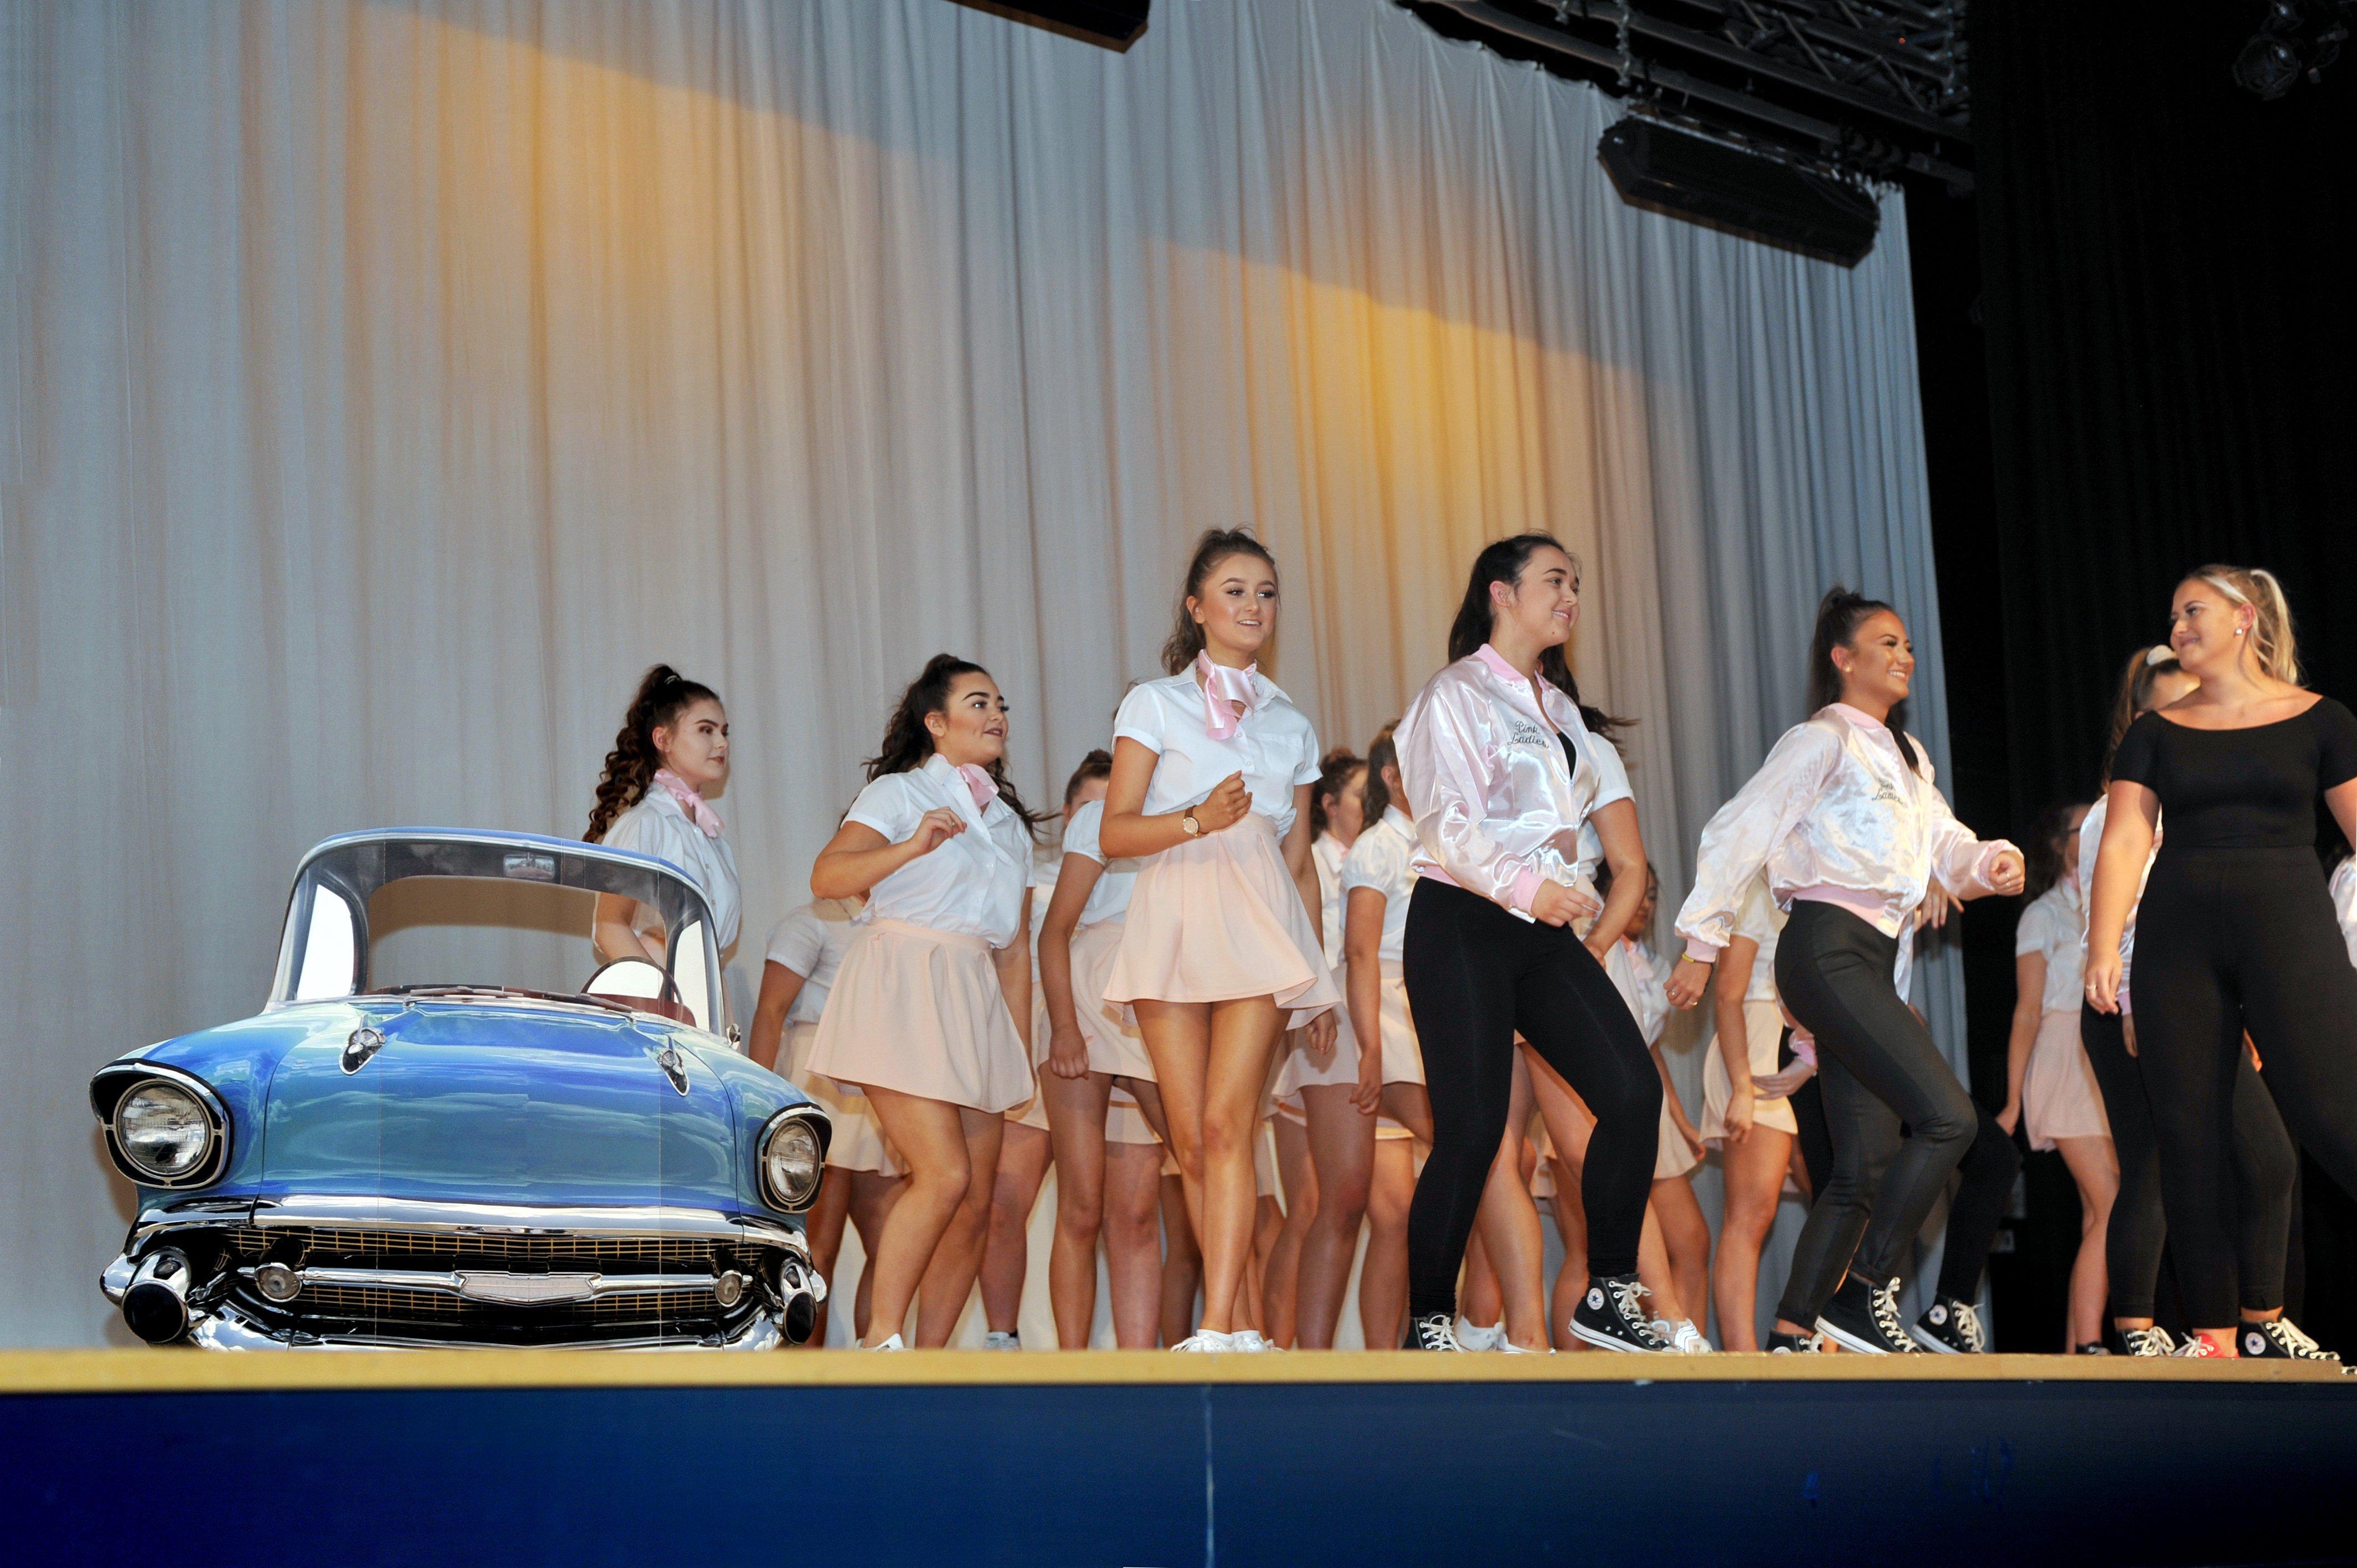 Denny High School annual inter-house dance-off. Hartfell performing 'Grease'. Picture by Roberto Cavieres.